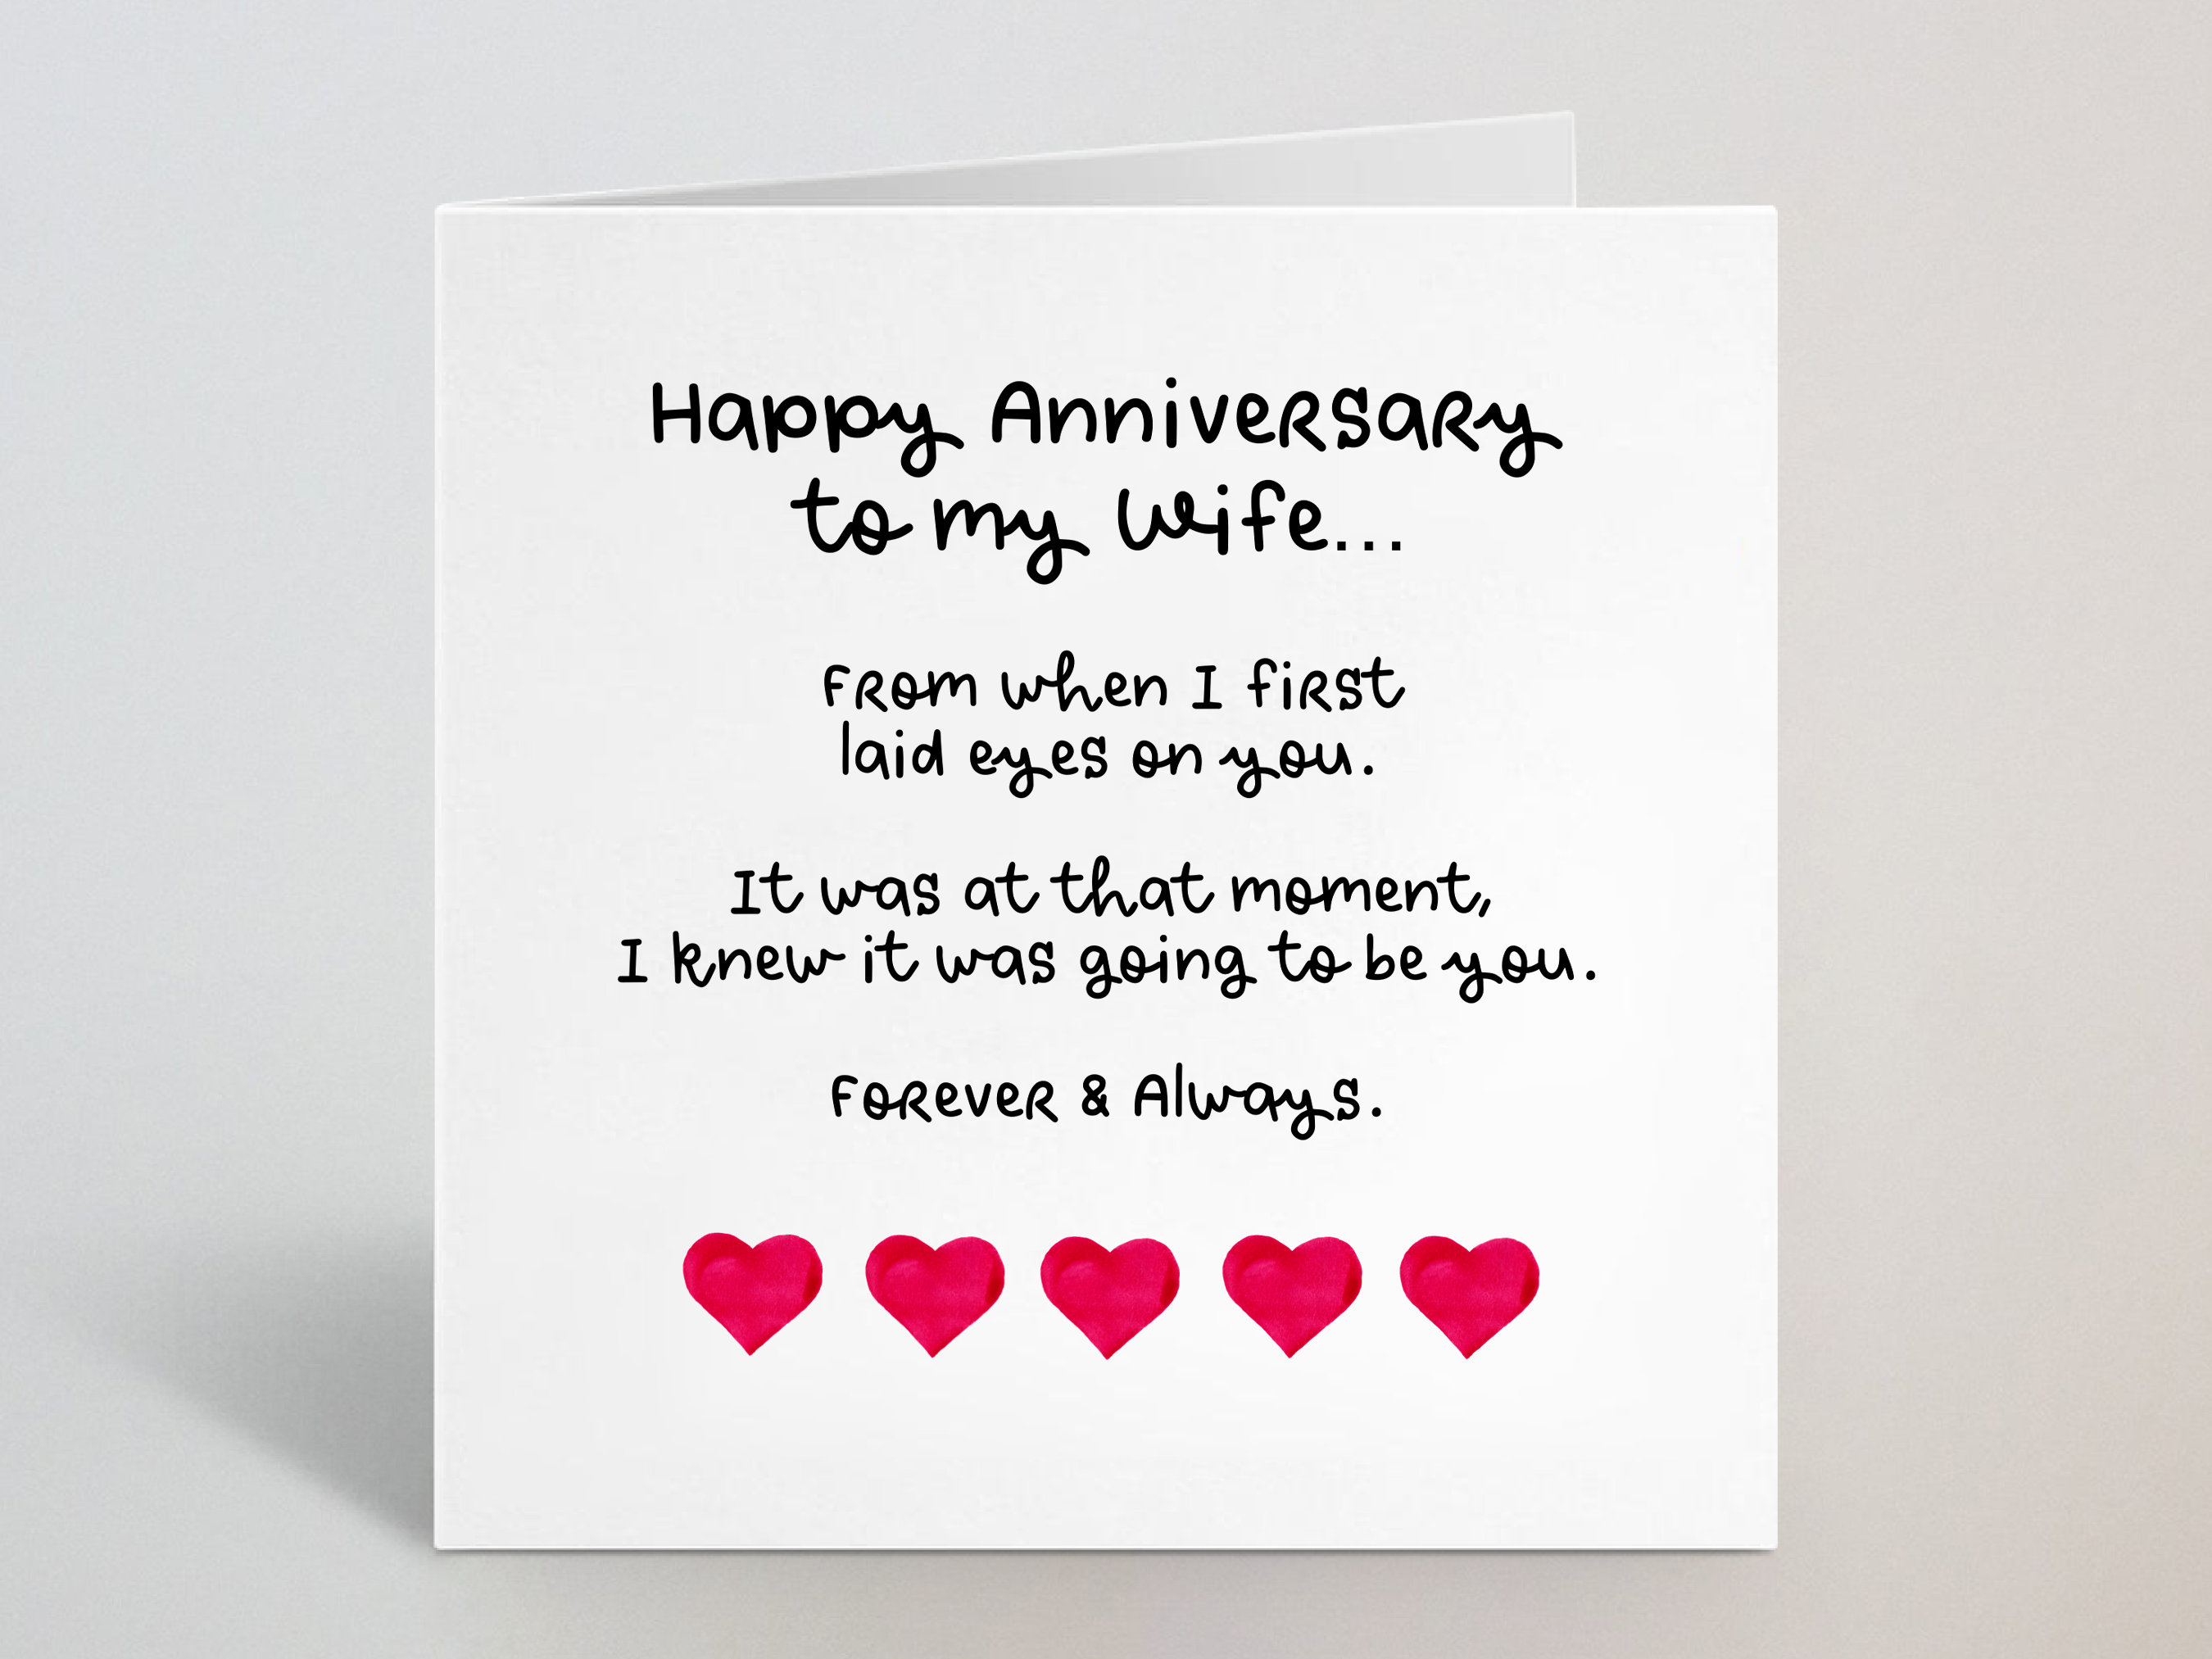 Happy Anniversary to My Wife Lovely Words Greeting Card